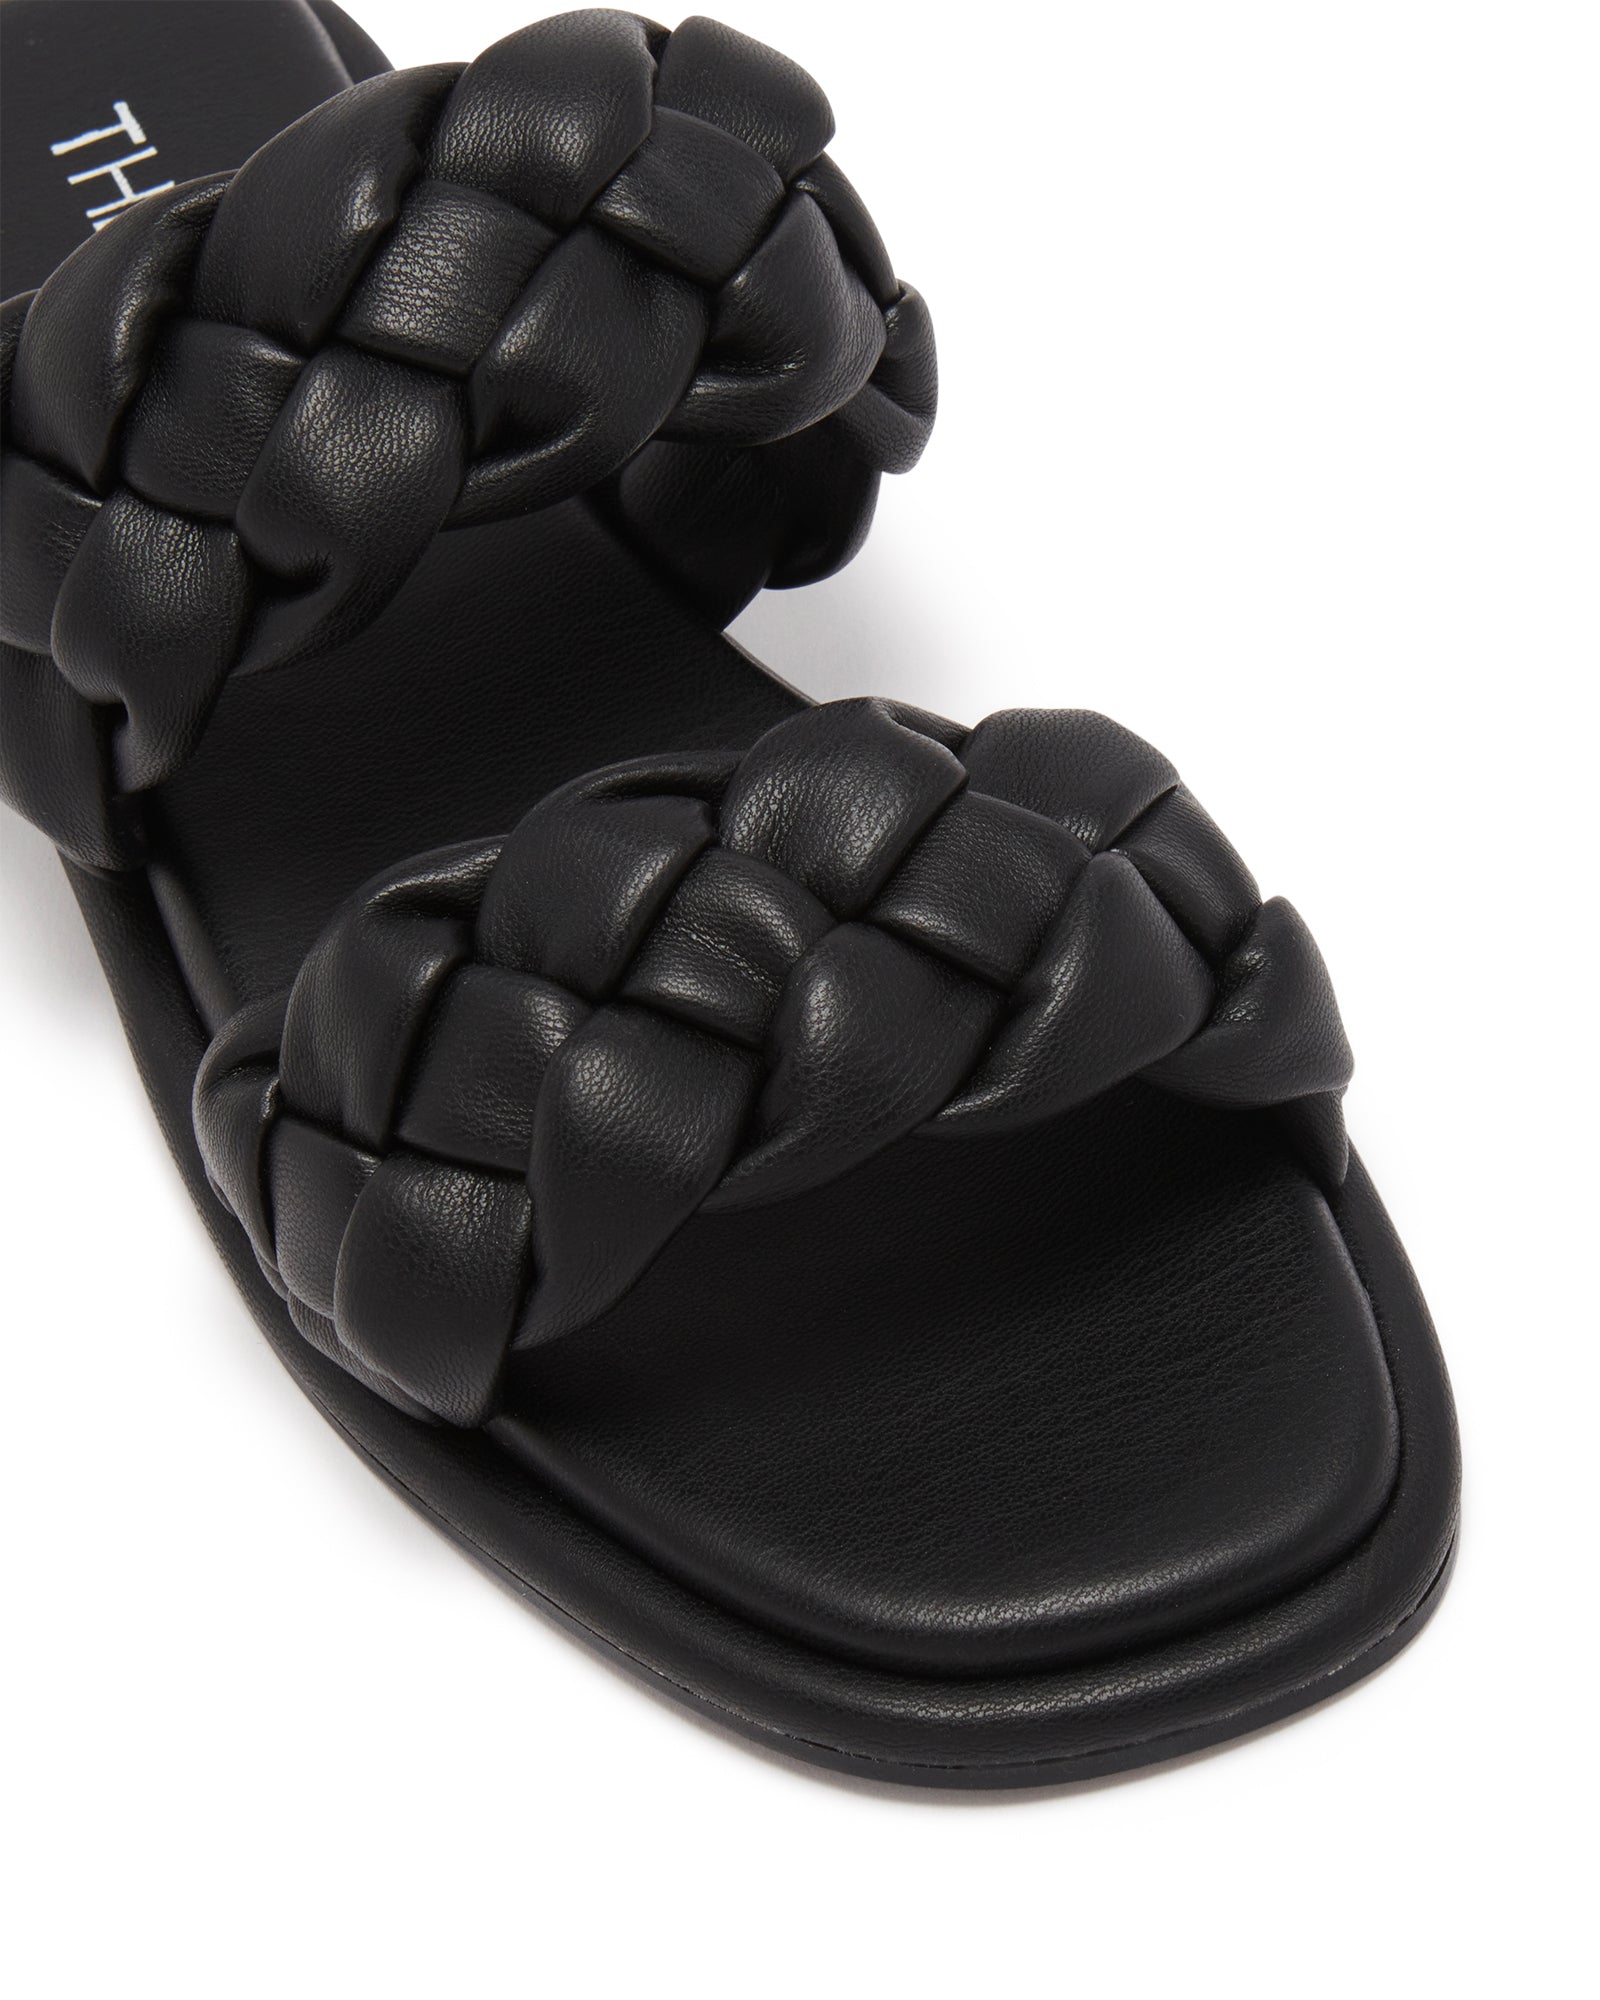 Therapy Shoes Raain Black | Women's Sandals | Slides | Flats | Woven